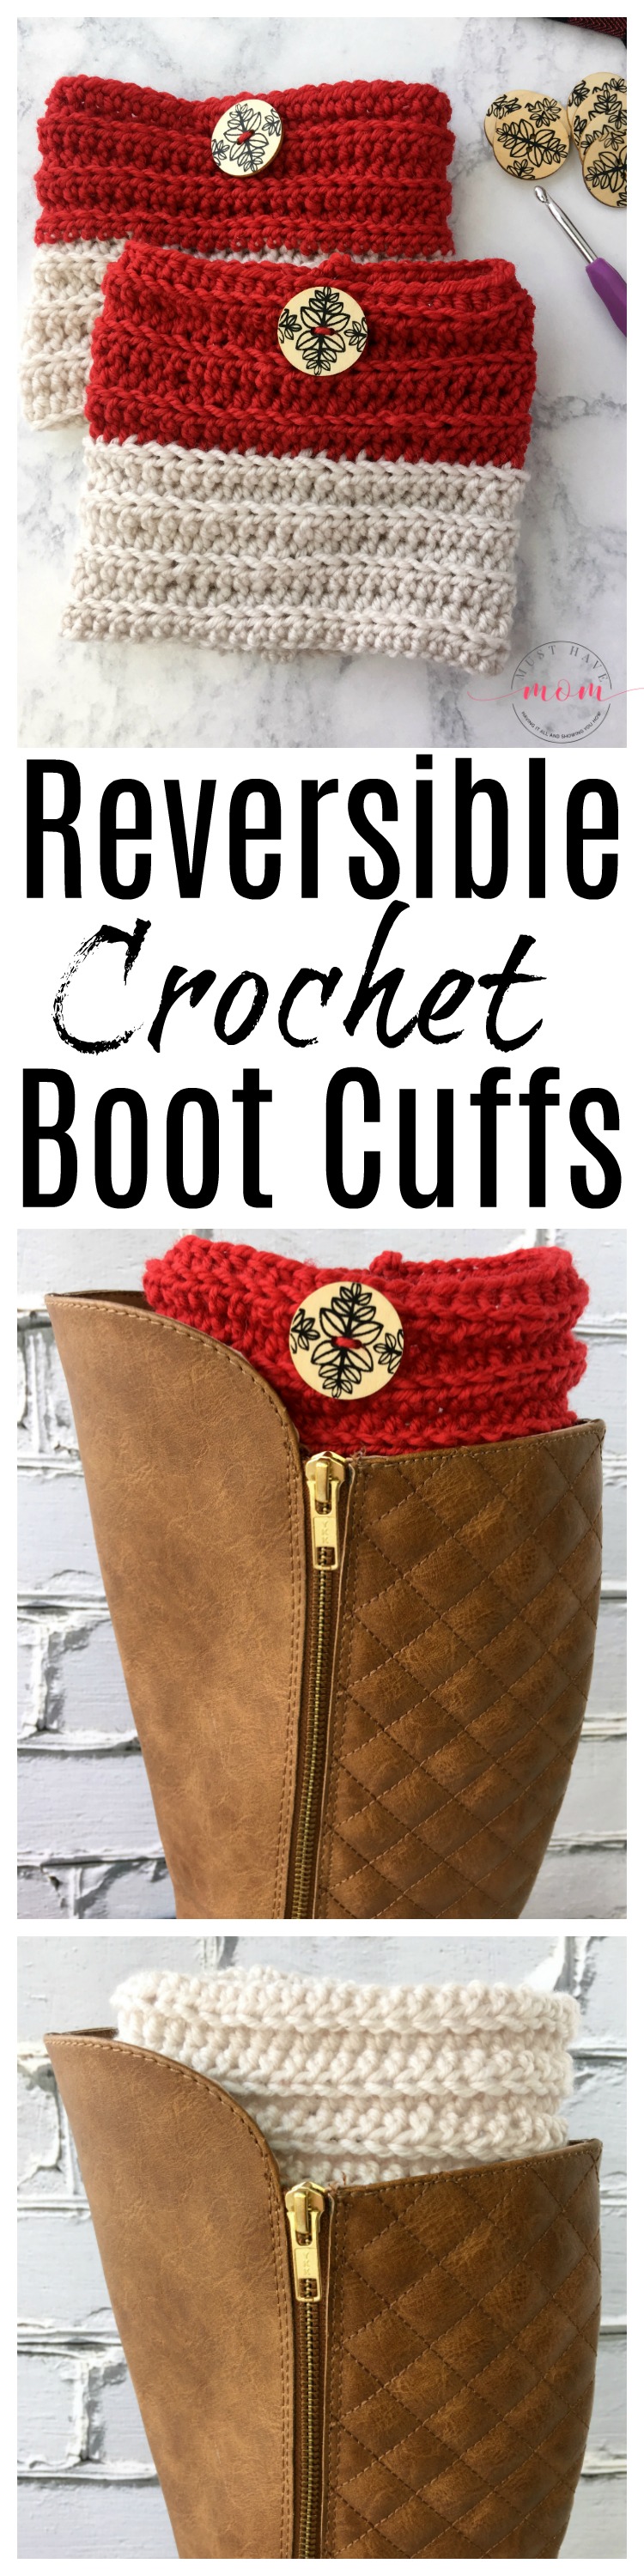 Easy reversible crochet boot cuffs free pattern perfect for beginners. Great crochet gift idea!